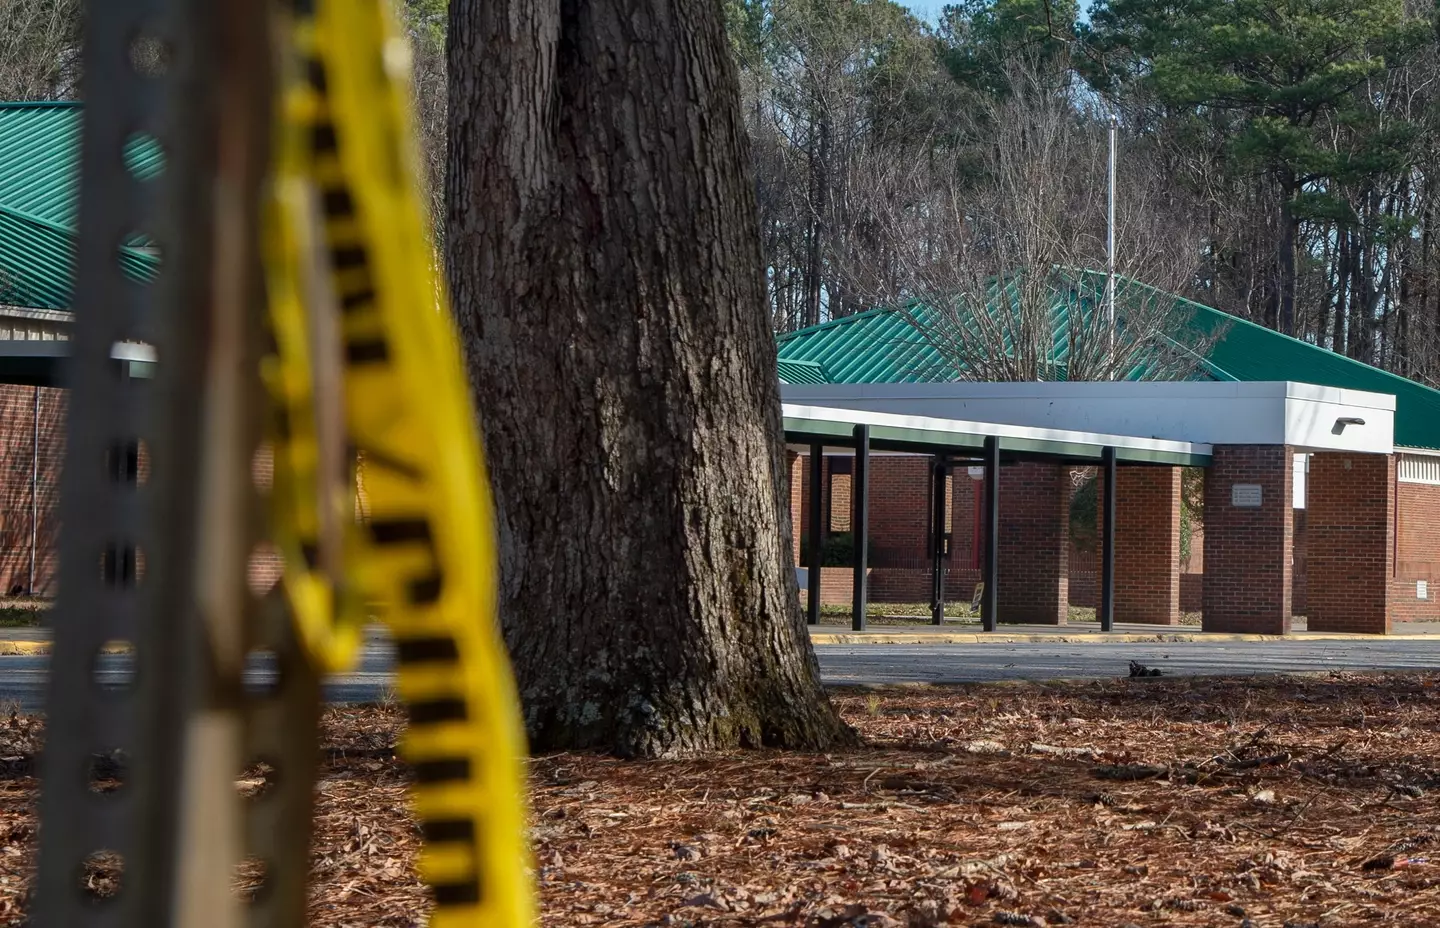 Richneck Elementary School, Virginia, where the 6 January shooting took place.